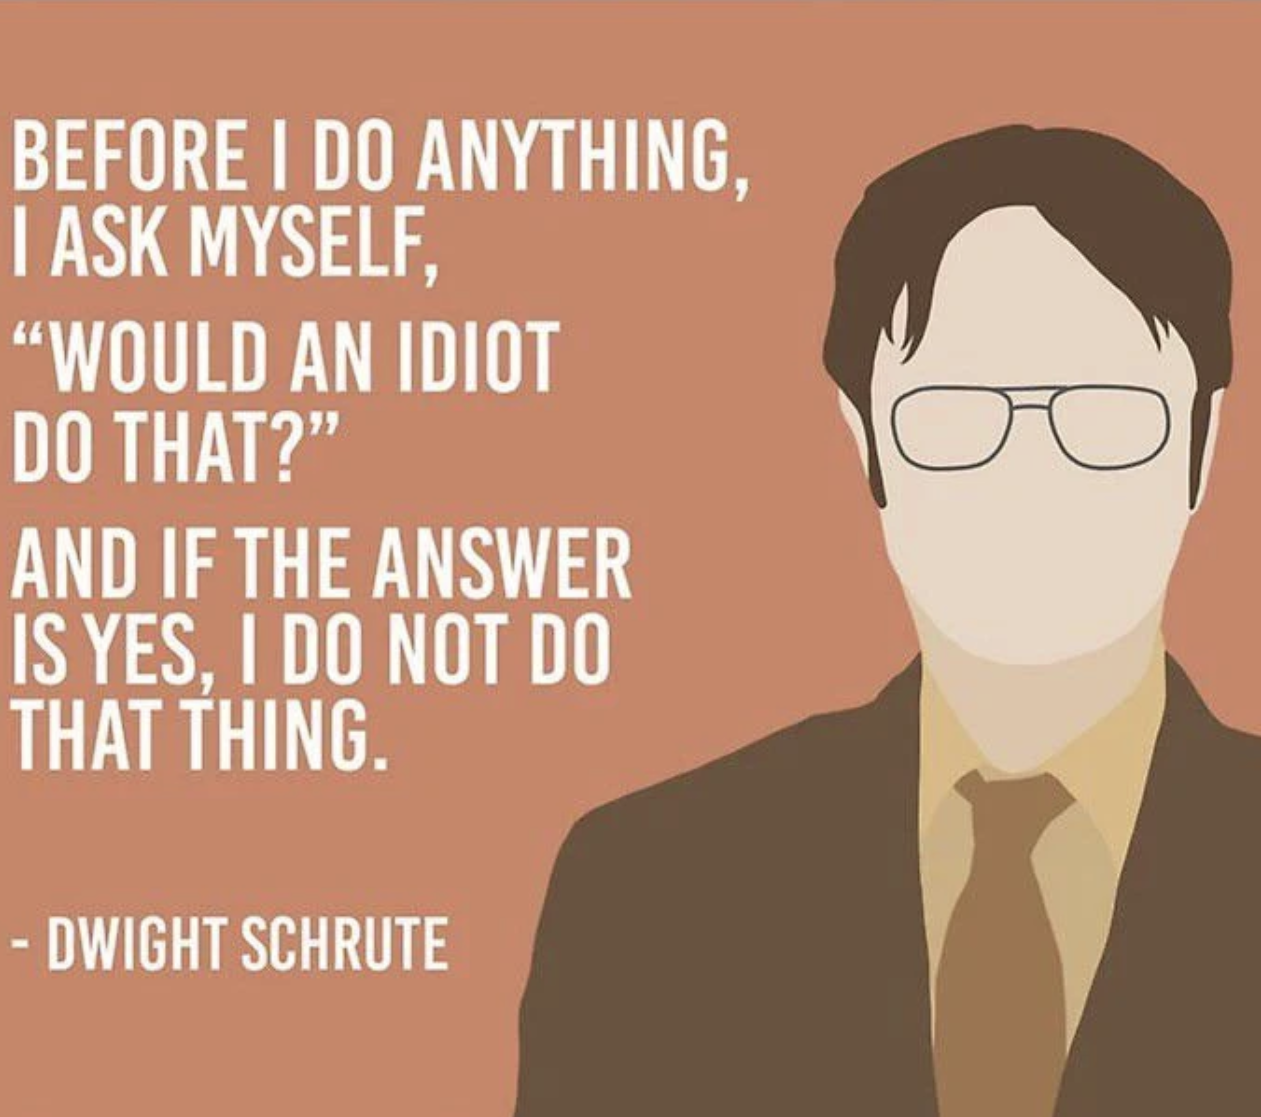 Image of Dwight Schrute from The Office, with the text, Before I do anything I ask myself, would an idiot do that. And if the answer is yes, I do not do that thing."